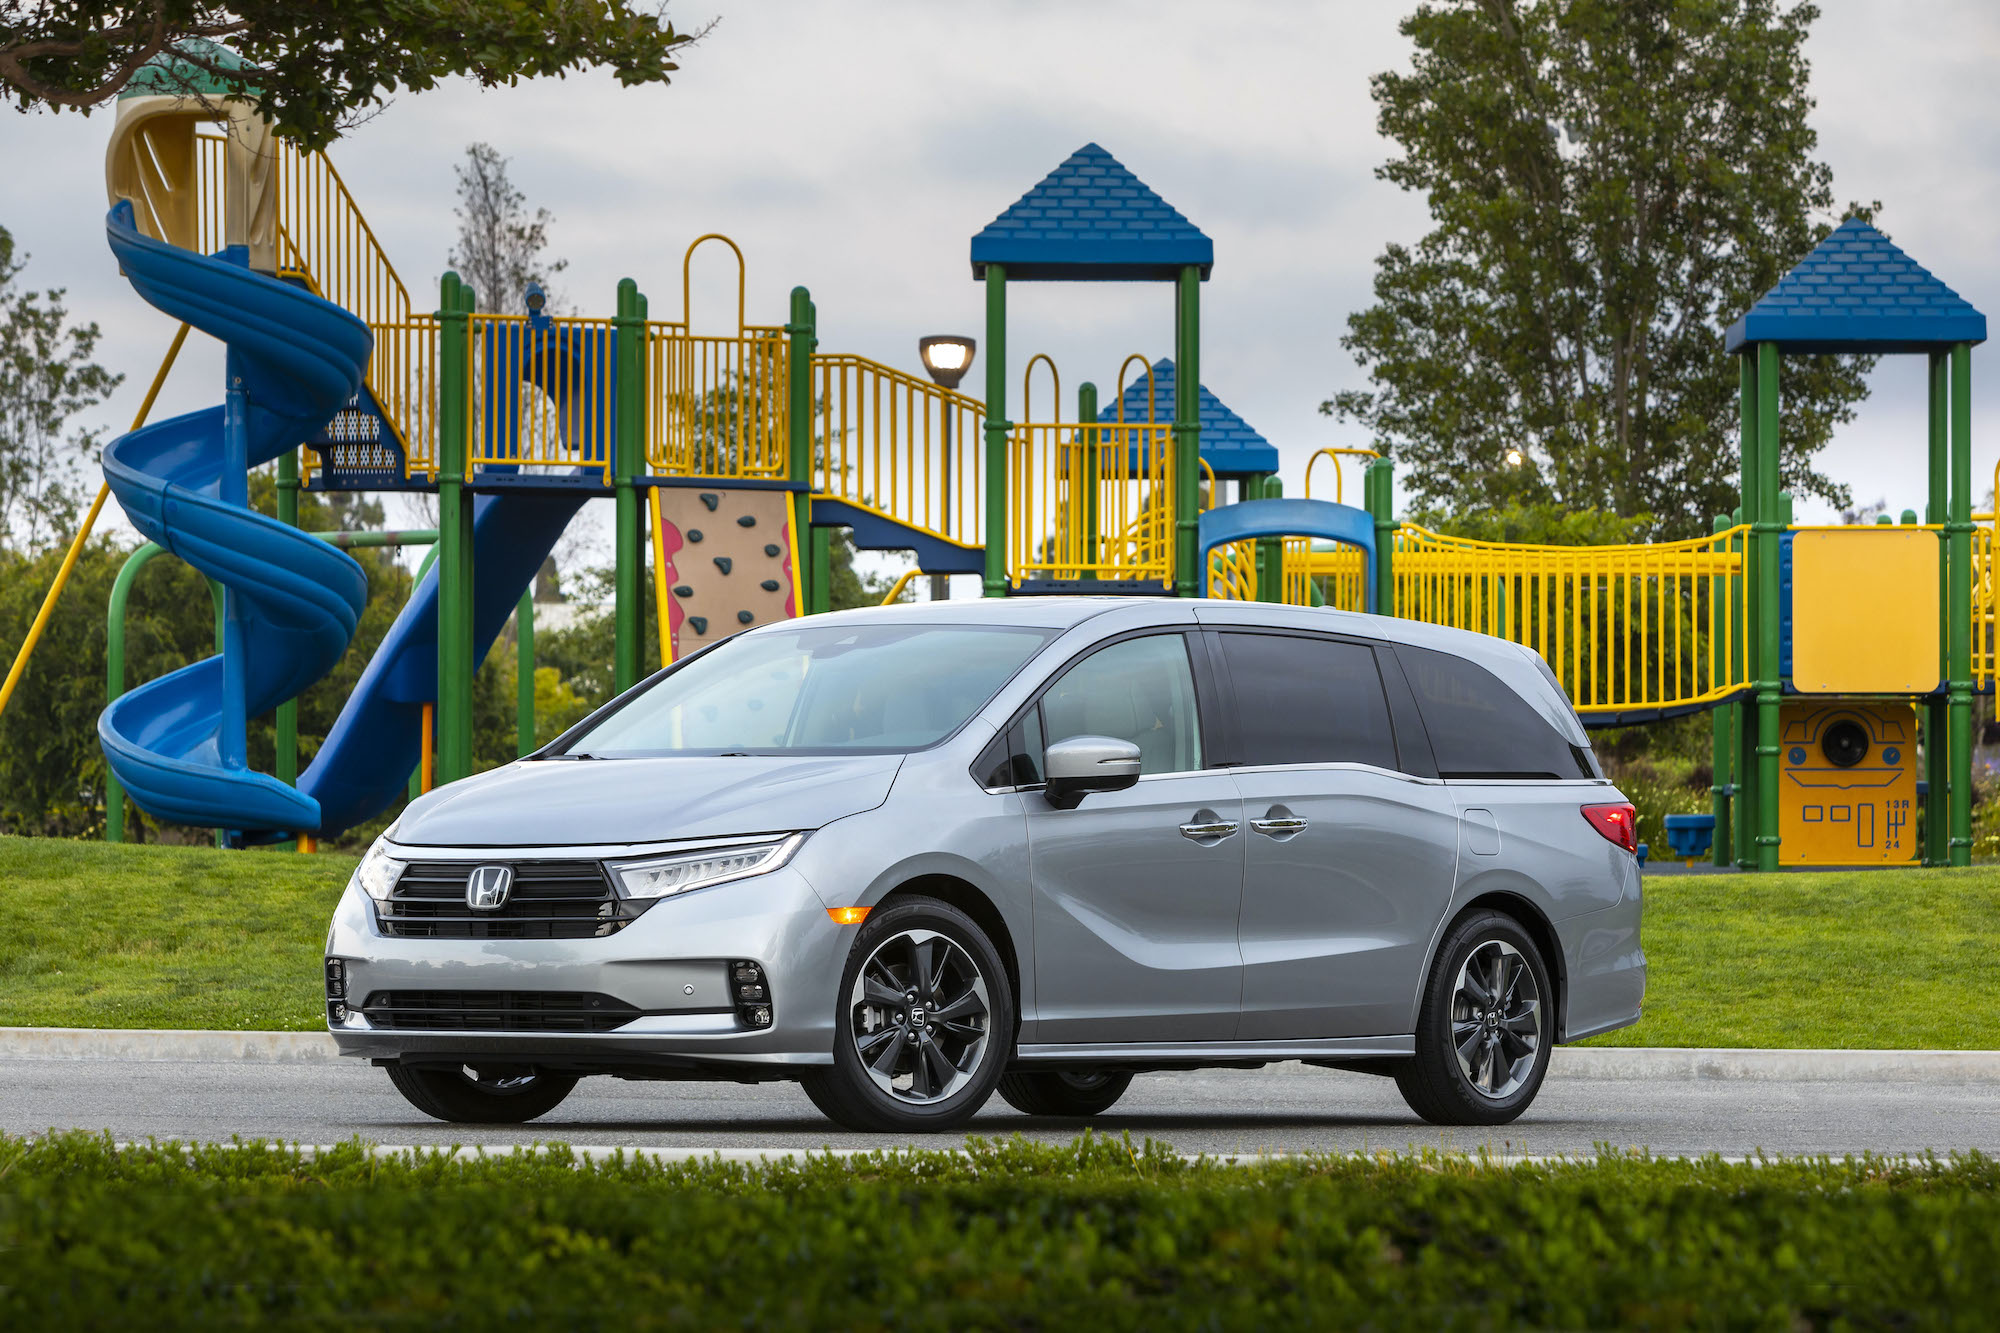 The 2021 Honda Odyssey, a worthy substitute of the Kia Telluride, parked in front of a playground